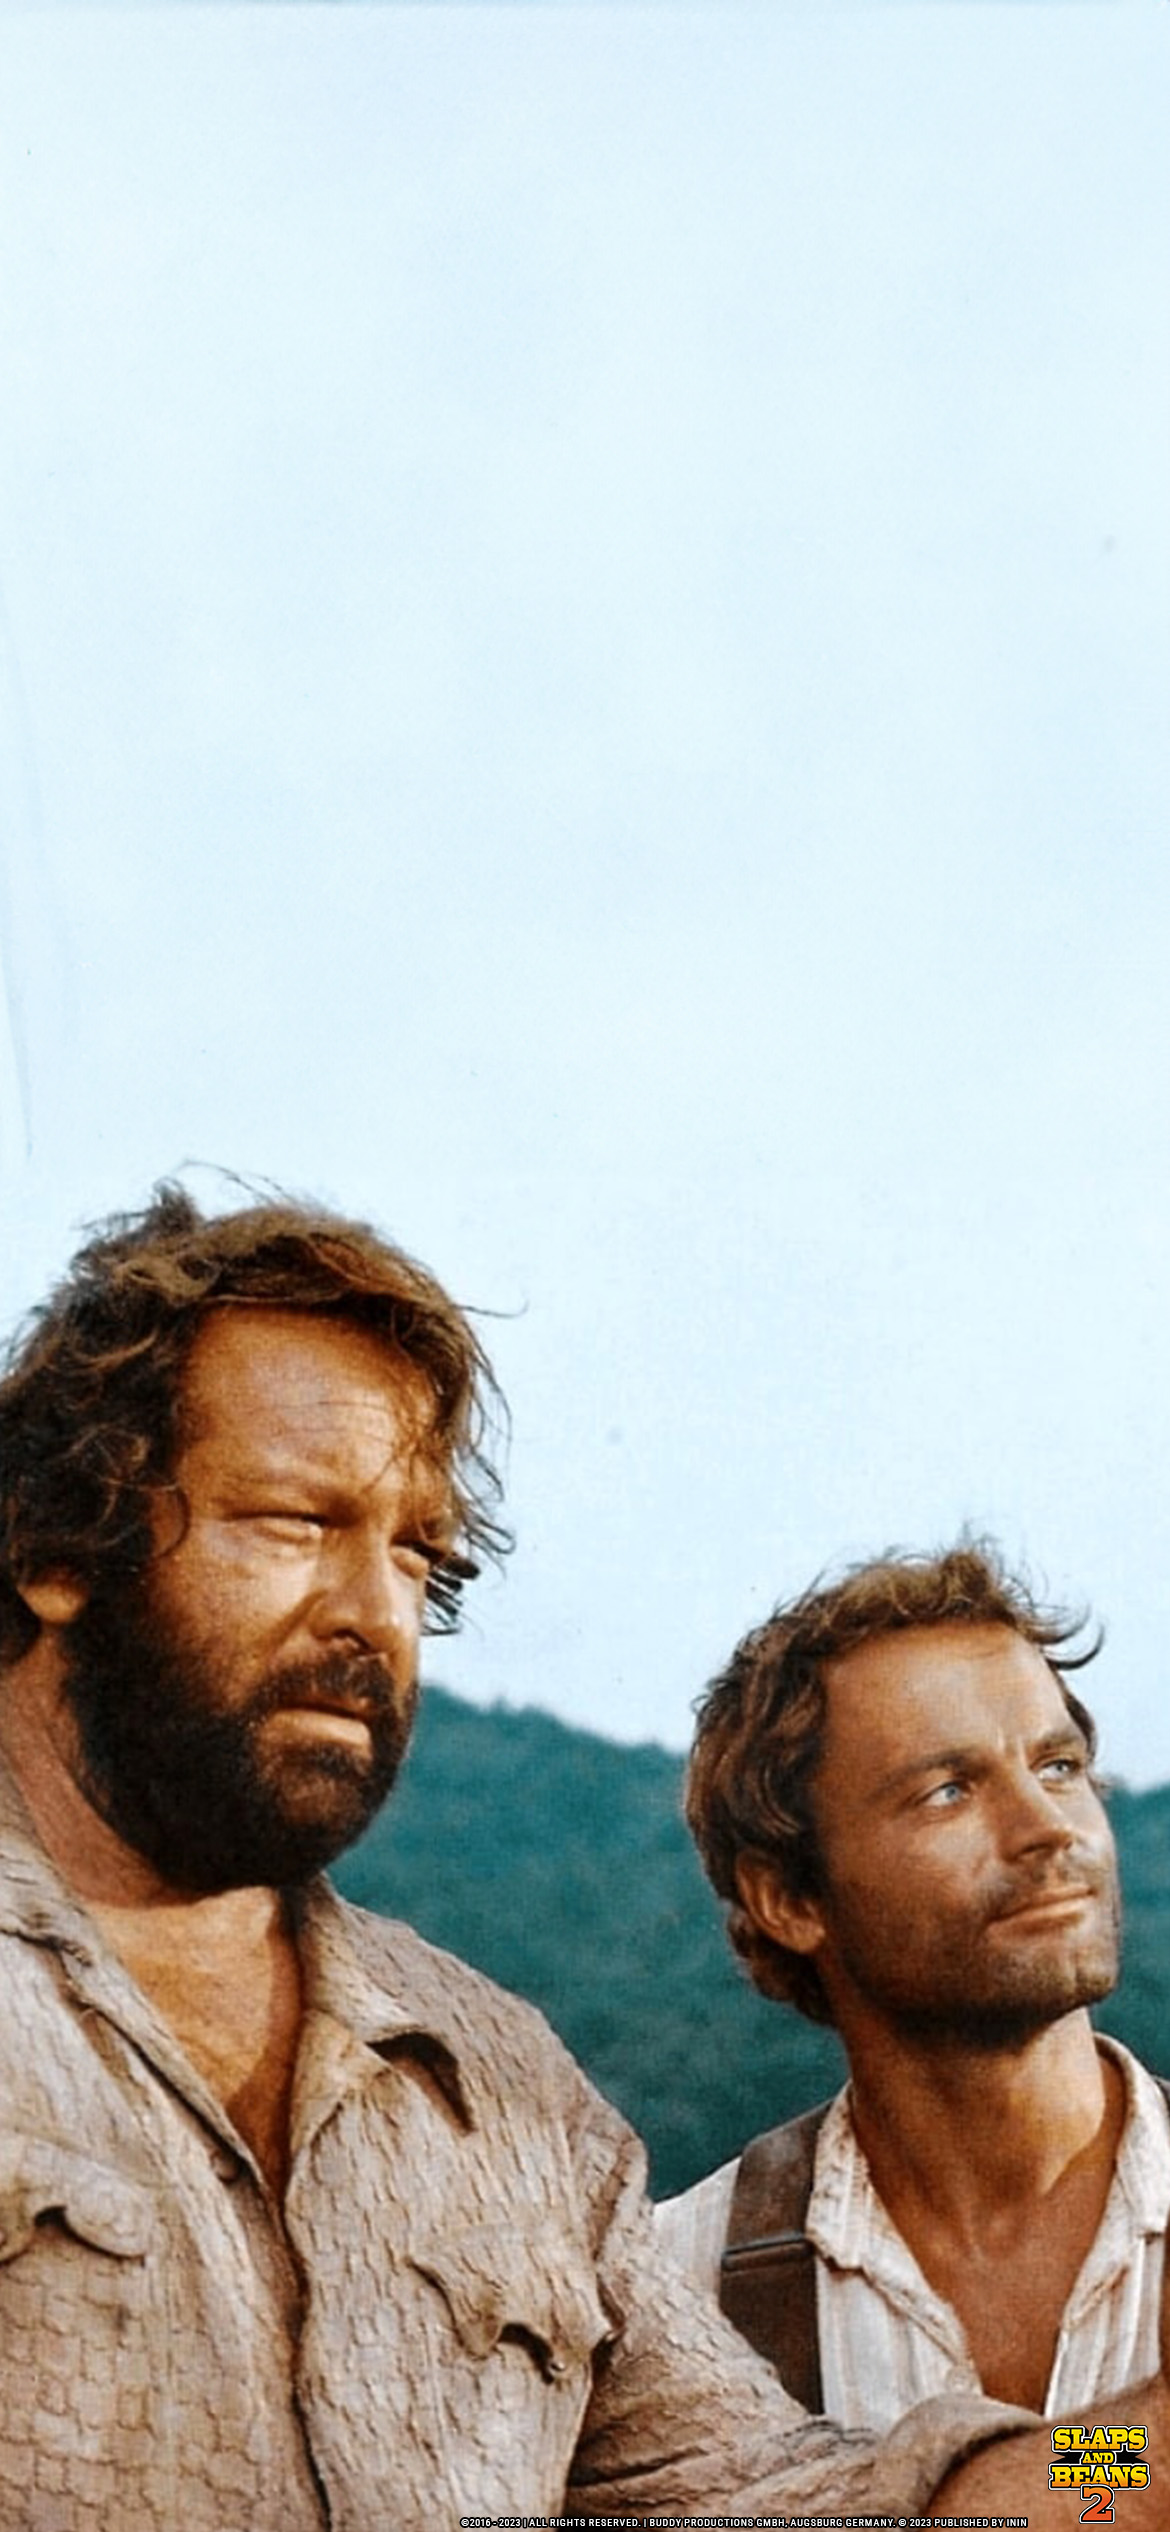 Bud Spencer & Terence Hill - Slaps Beans and 2